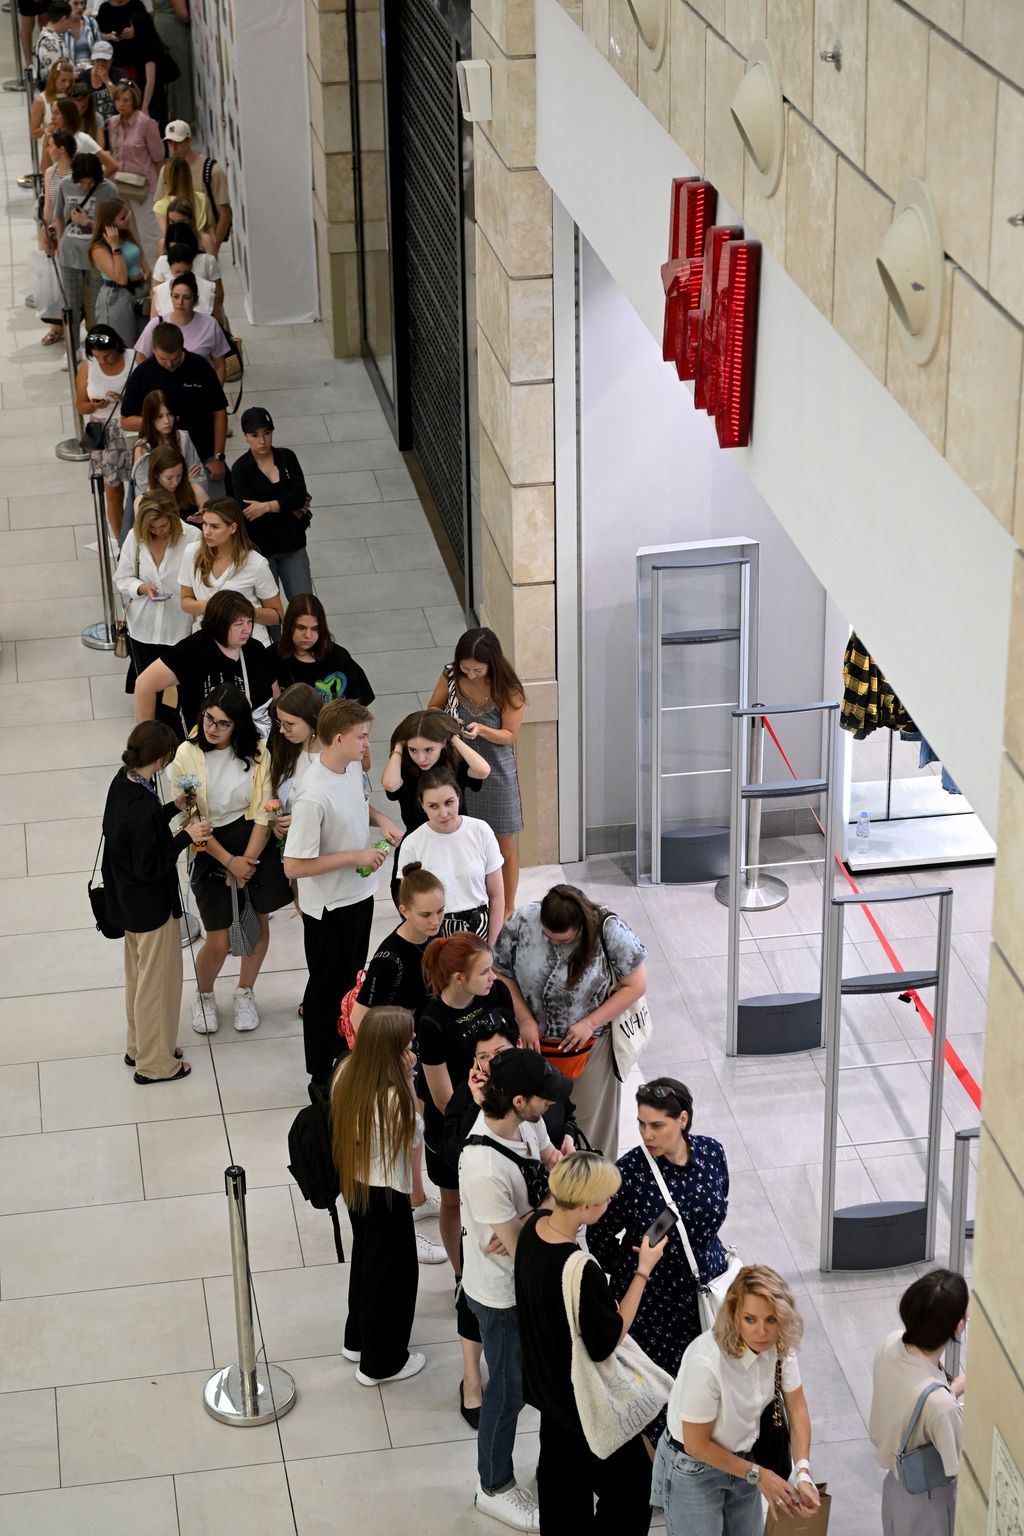 People queue outside an H&M clothing store, which opened the final sales before shuting down its business operations in Russia, at the Metropolis shopping centre in Moscow on August 3, 2022. (Photo by NATALIA KOLESNIKOVA / AFP) (Photo by NATALIA KOLESNIKOVA/AFP via Getty Images)